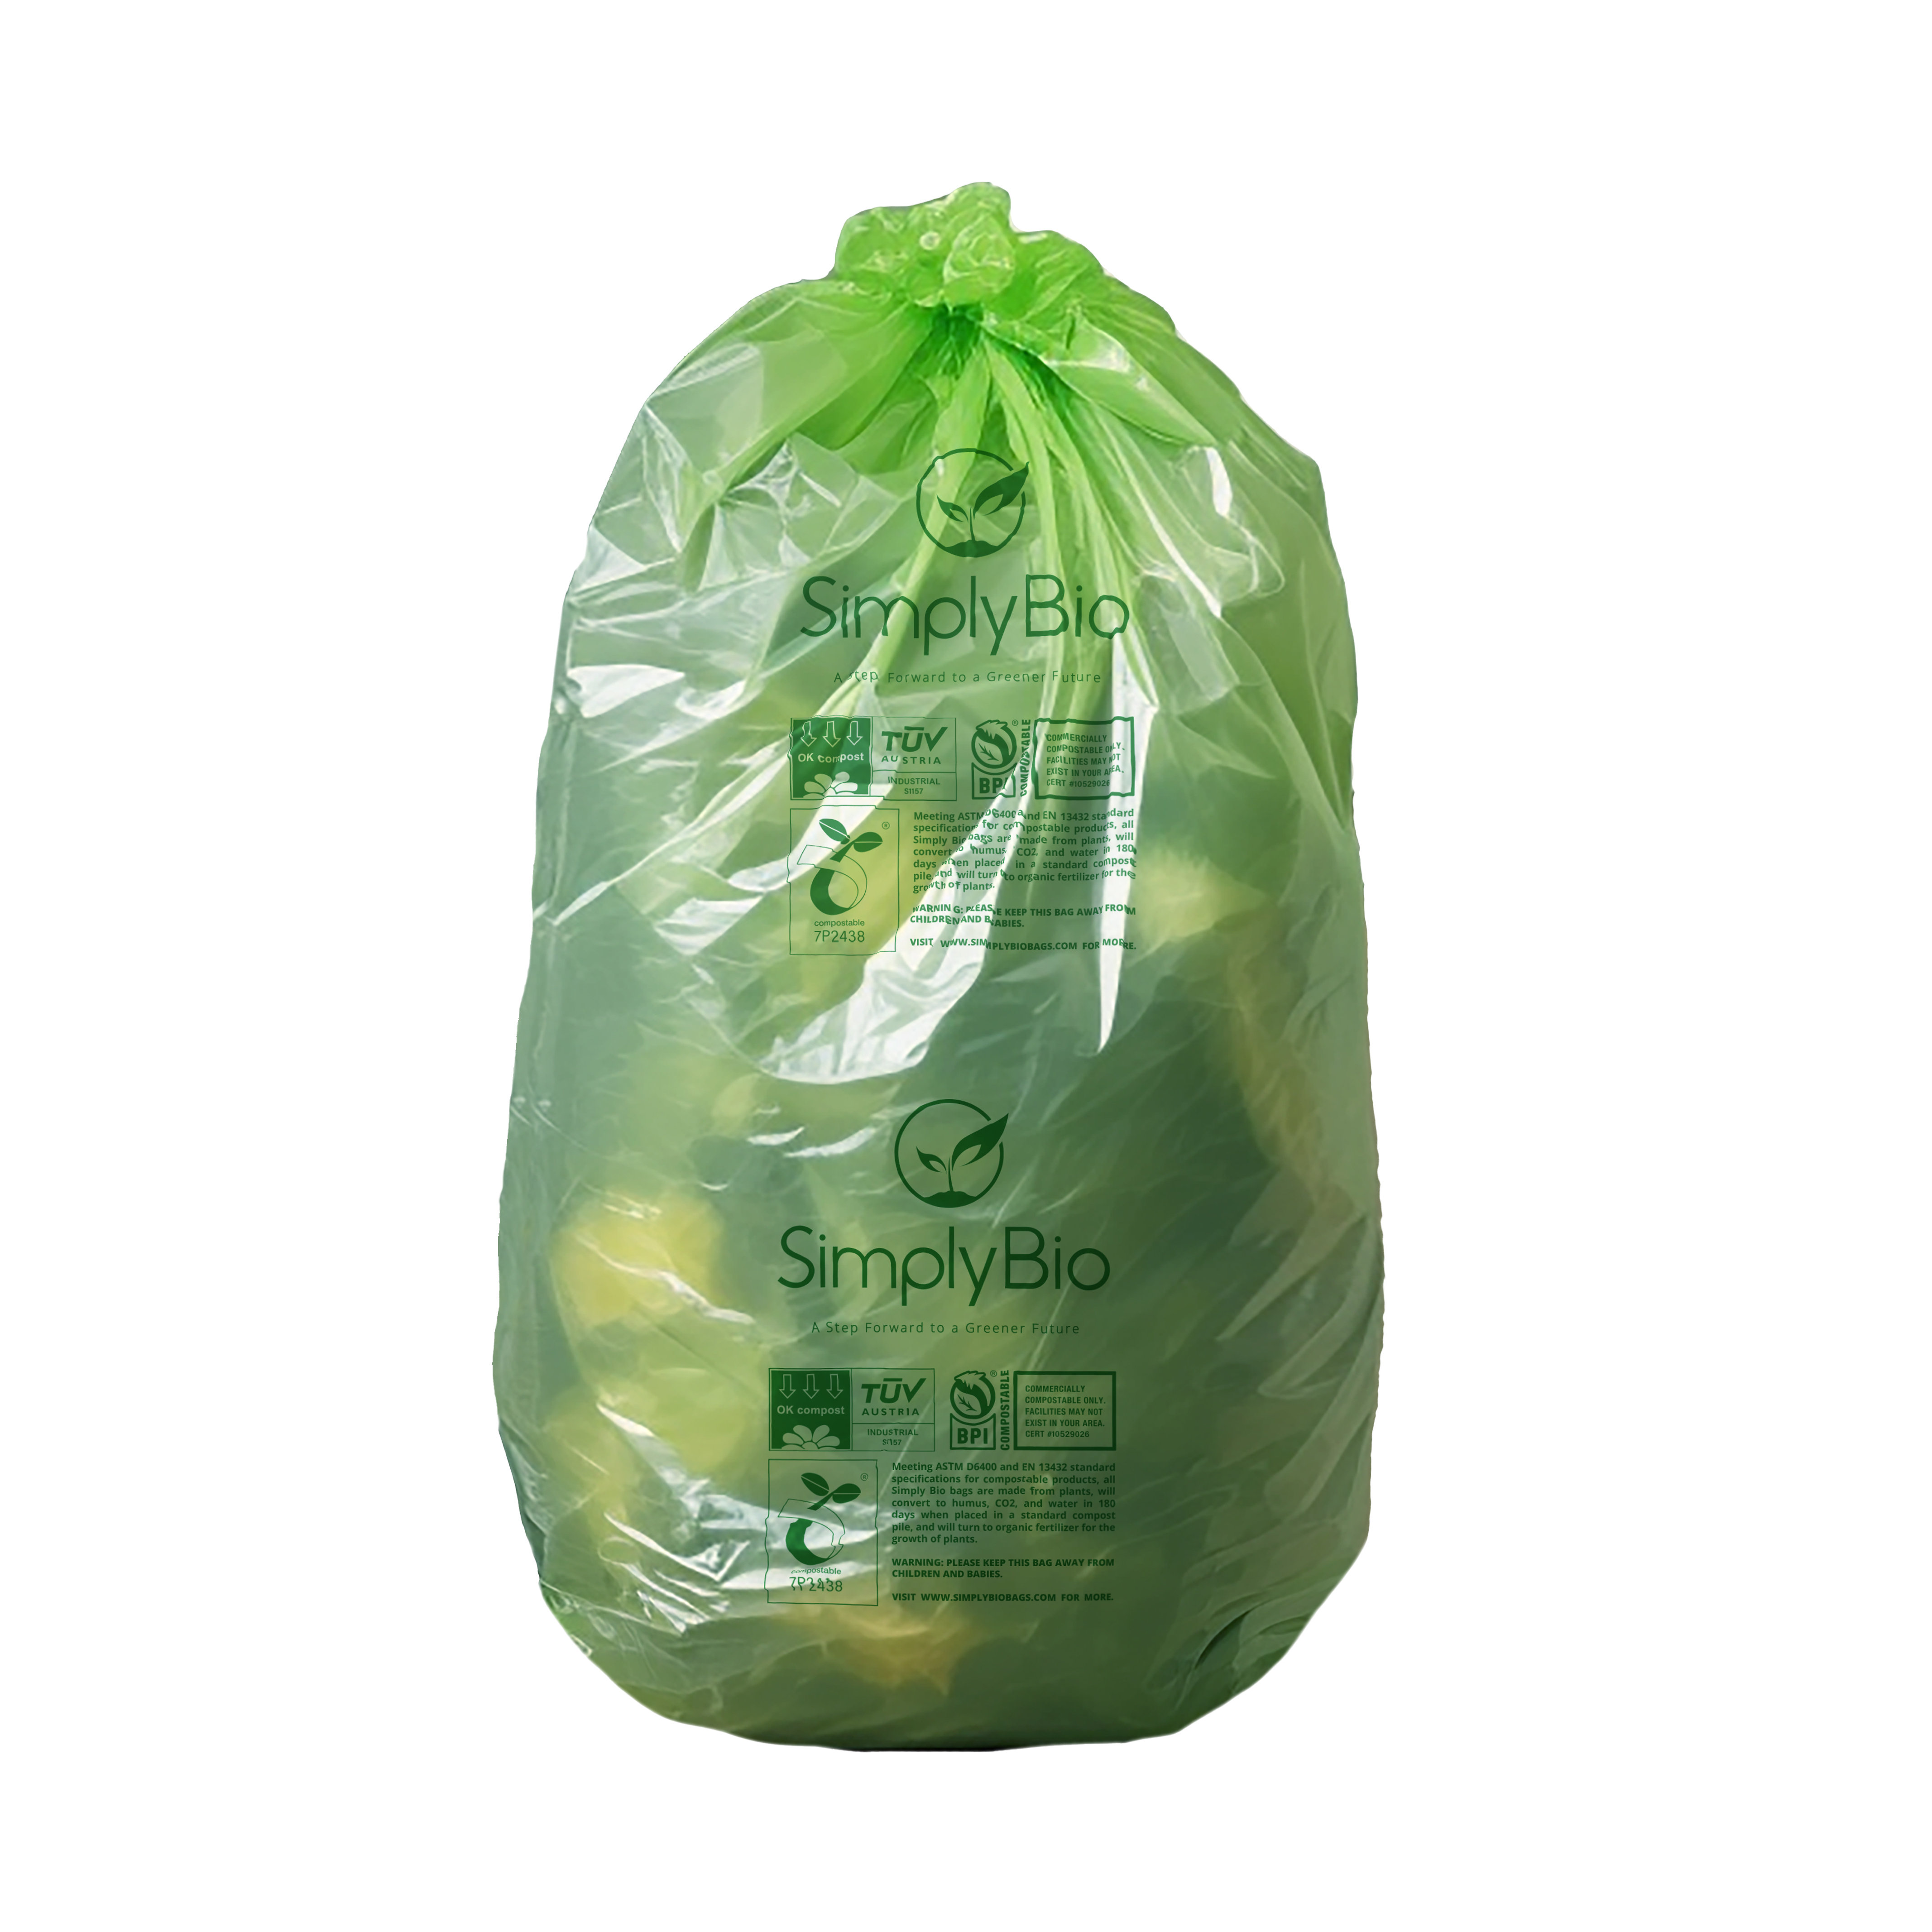 20 litre Biodegradable and Compostable Bin & Caddy Liners